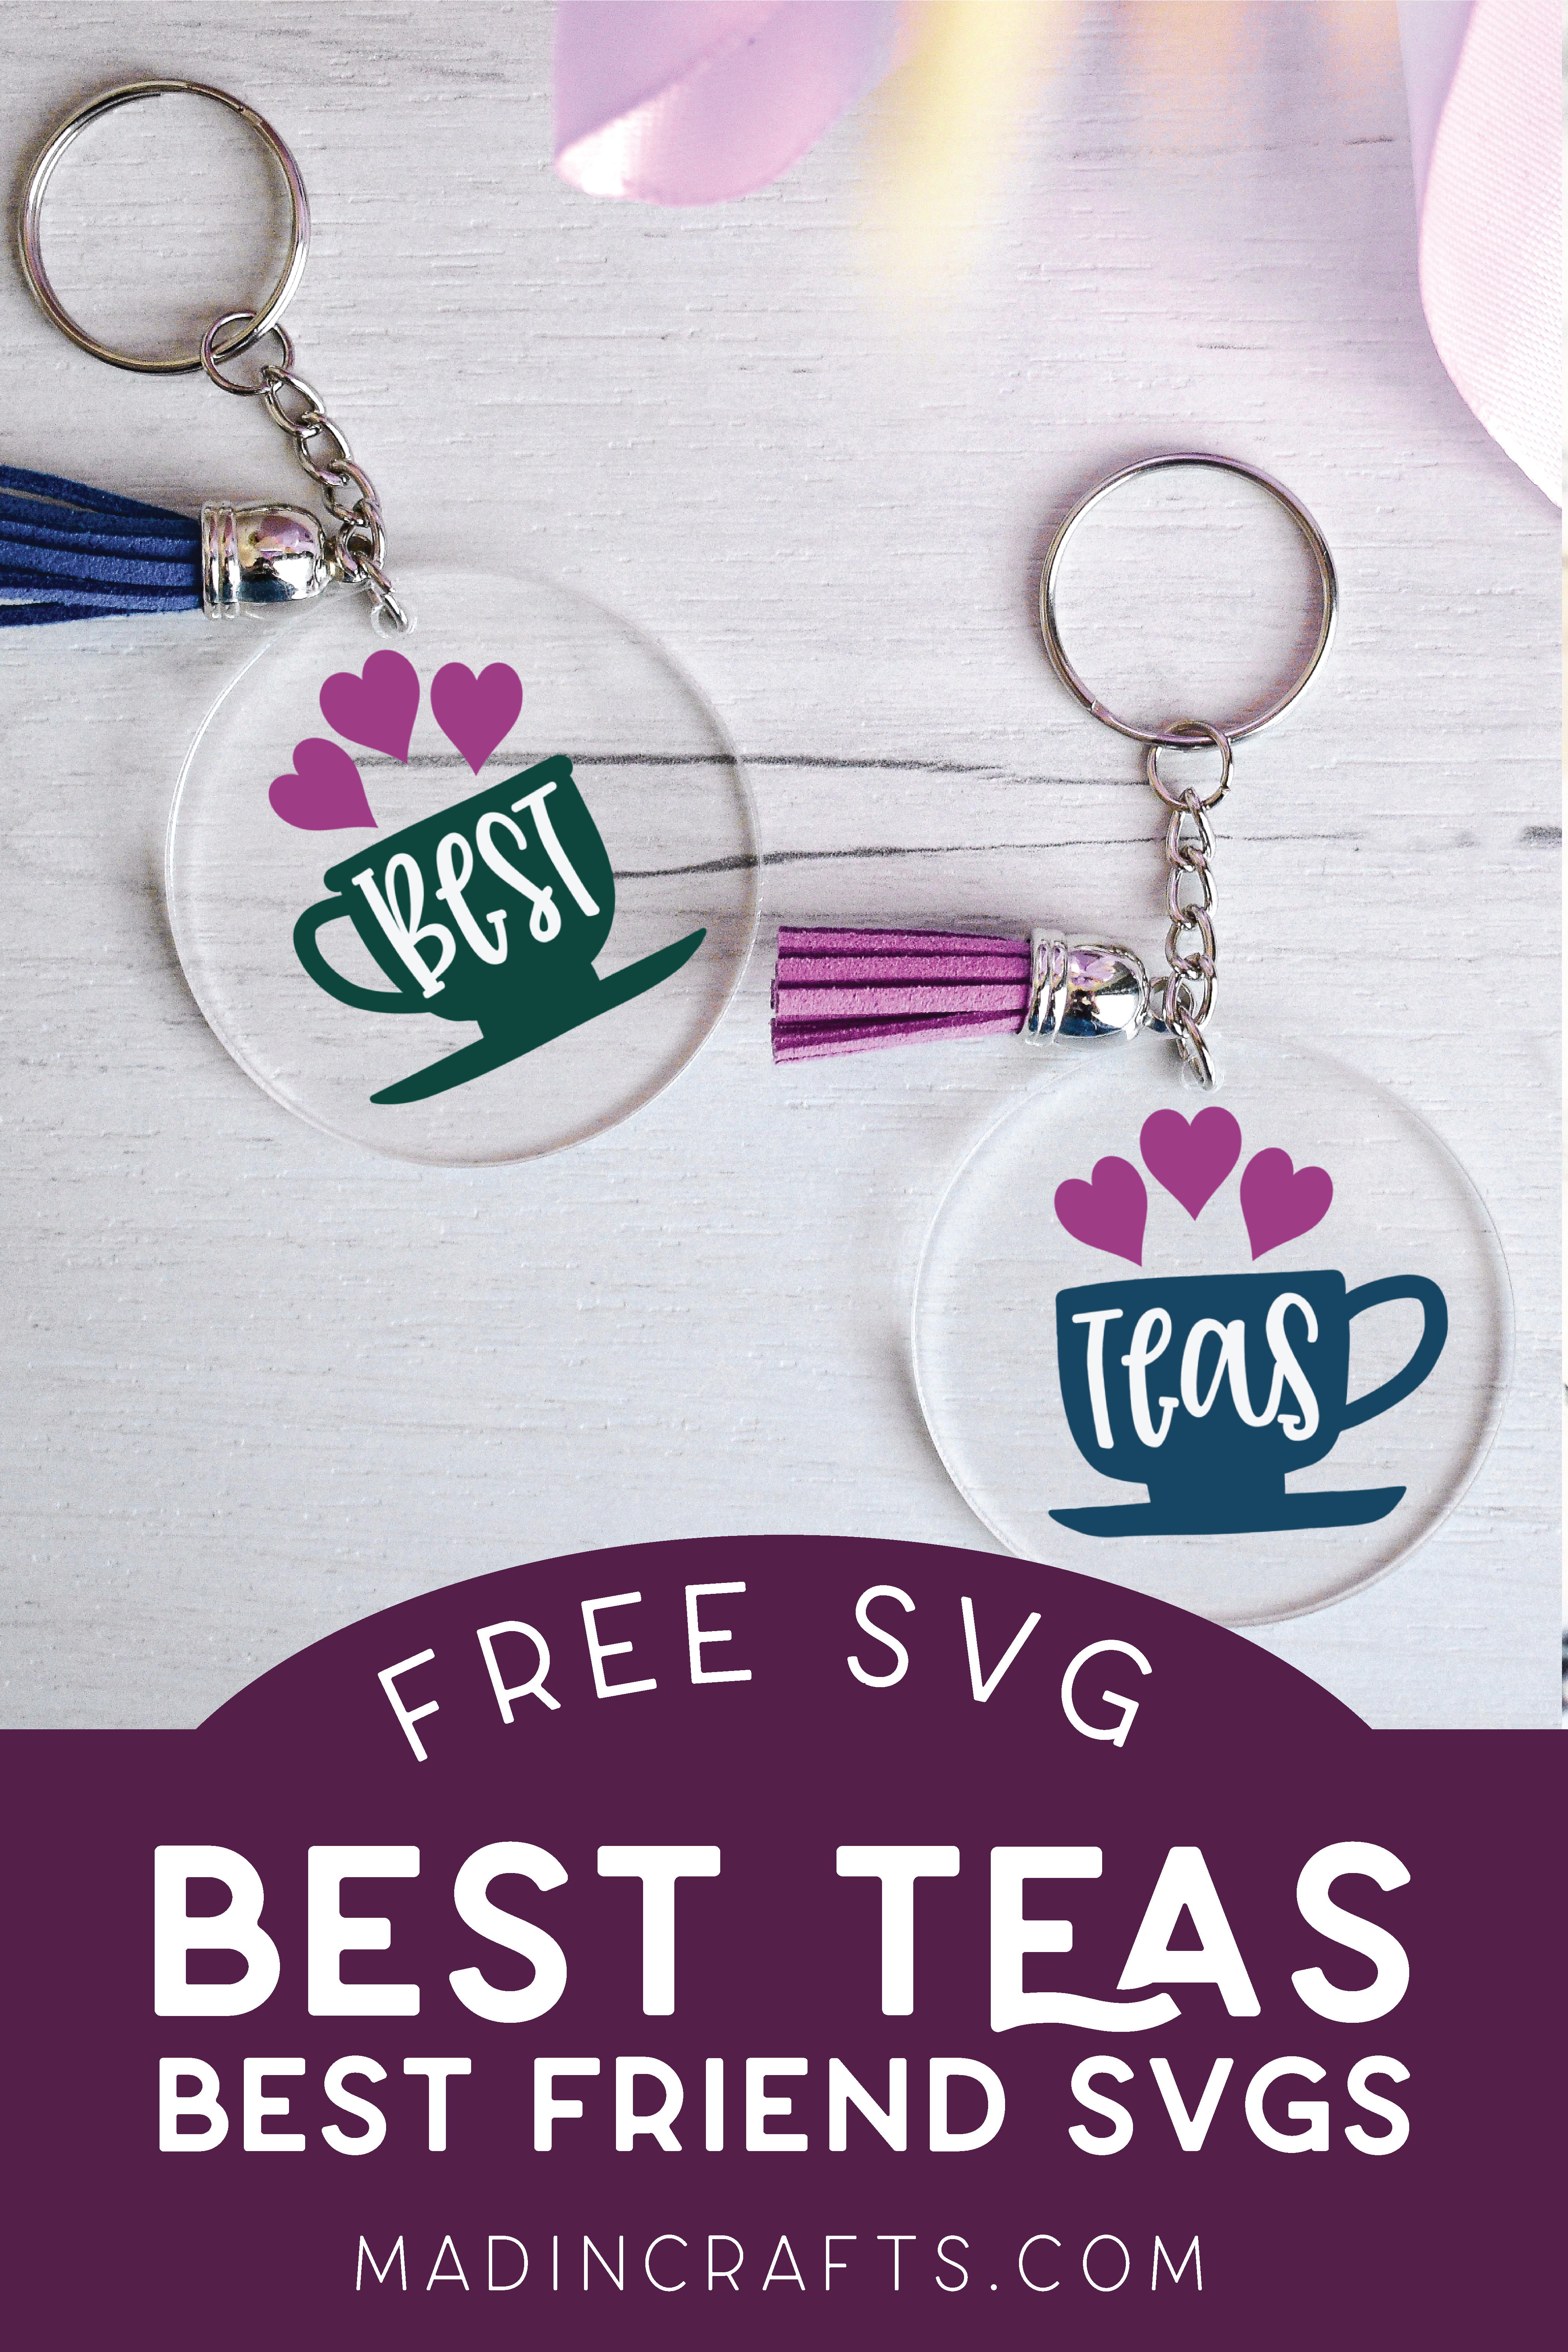 two acrylic key chains with Best and Teas in vinyl